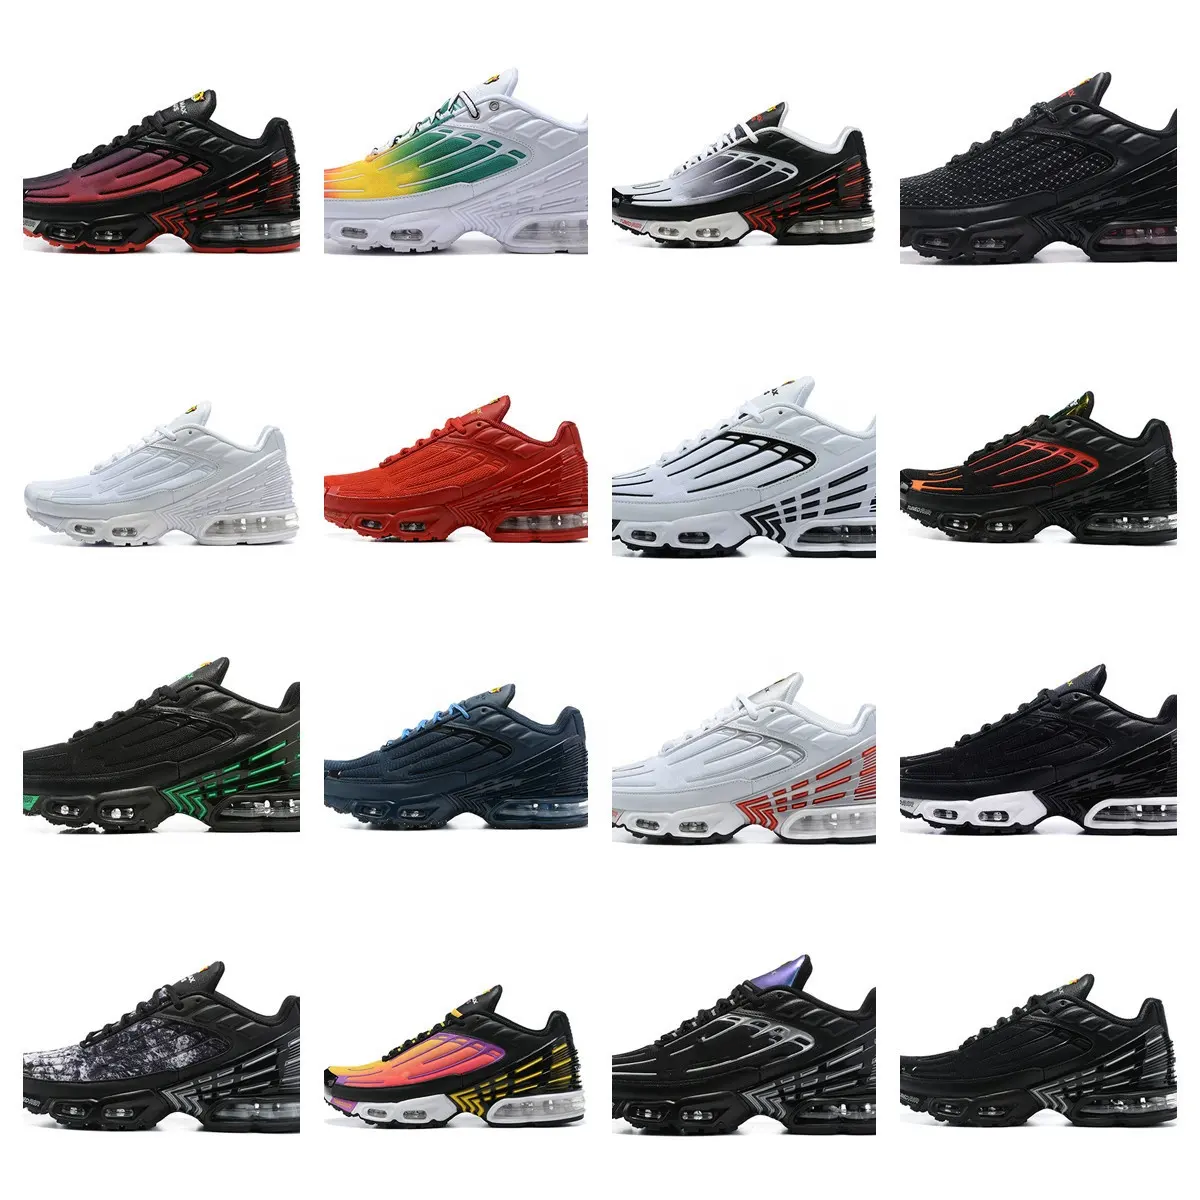 Top Quality Designer Sneaker TN 3 Color Block Air Cushion Running Shoes for Men and Women Shock Absorption Walking Style Shoes